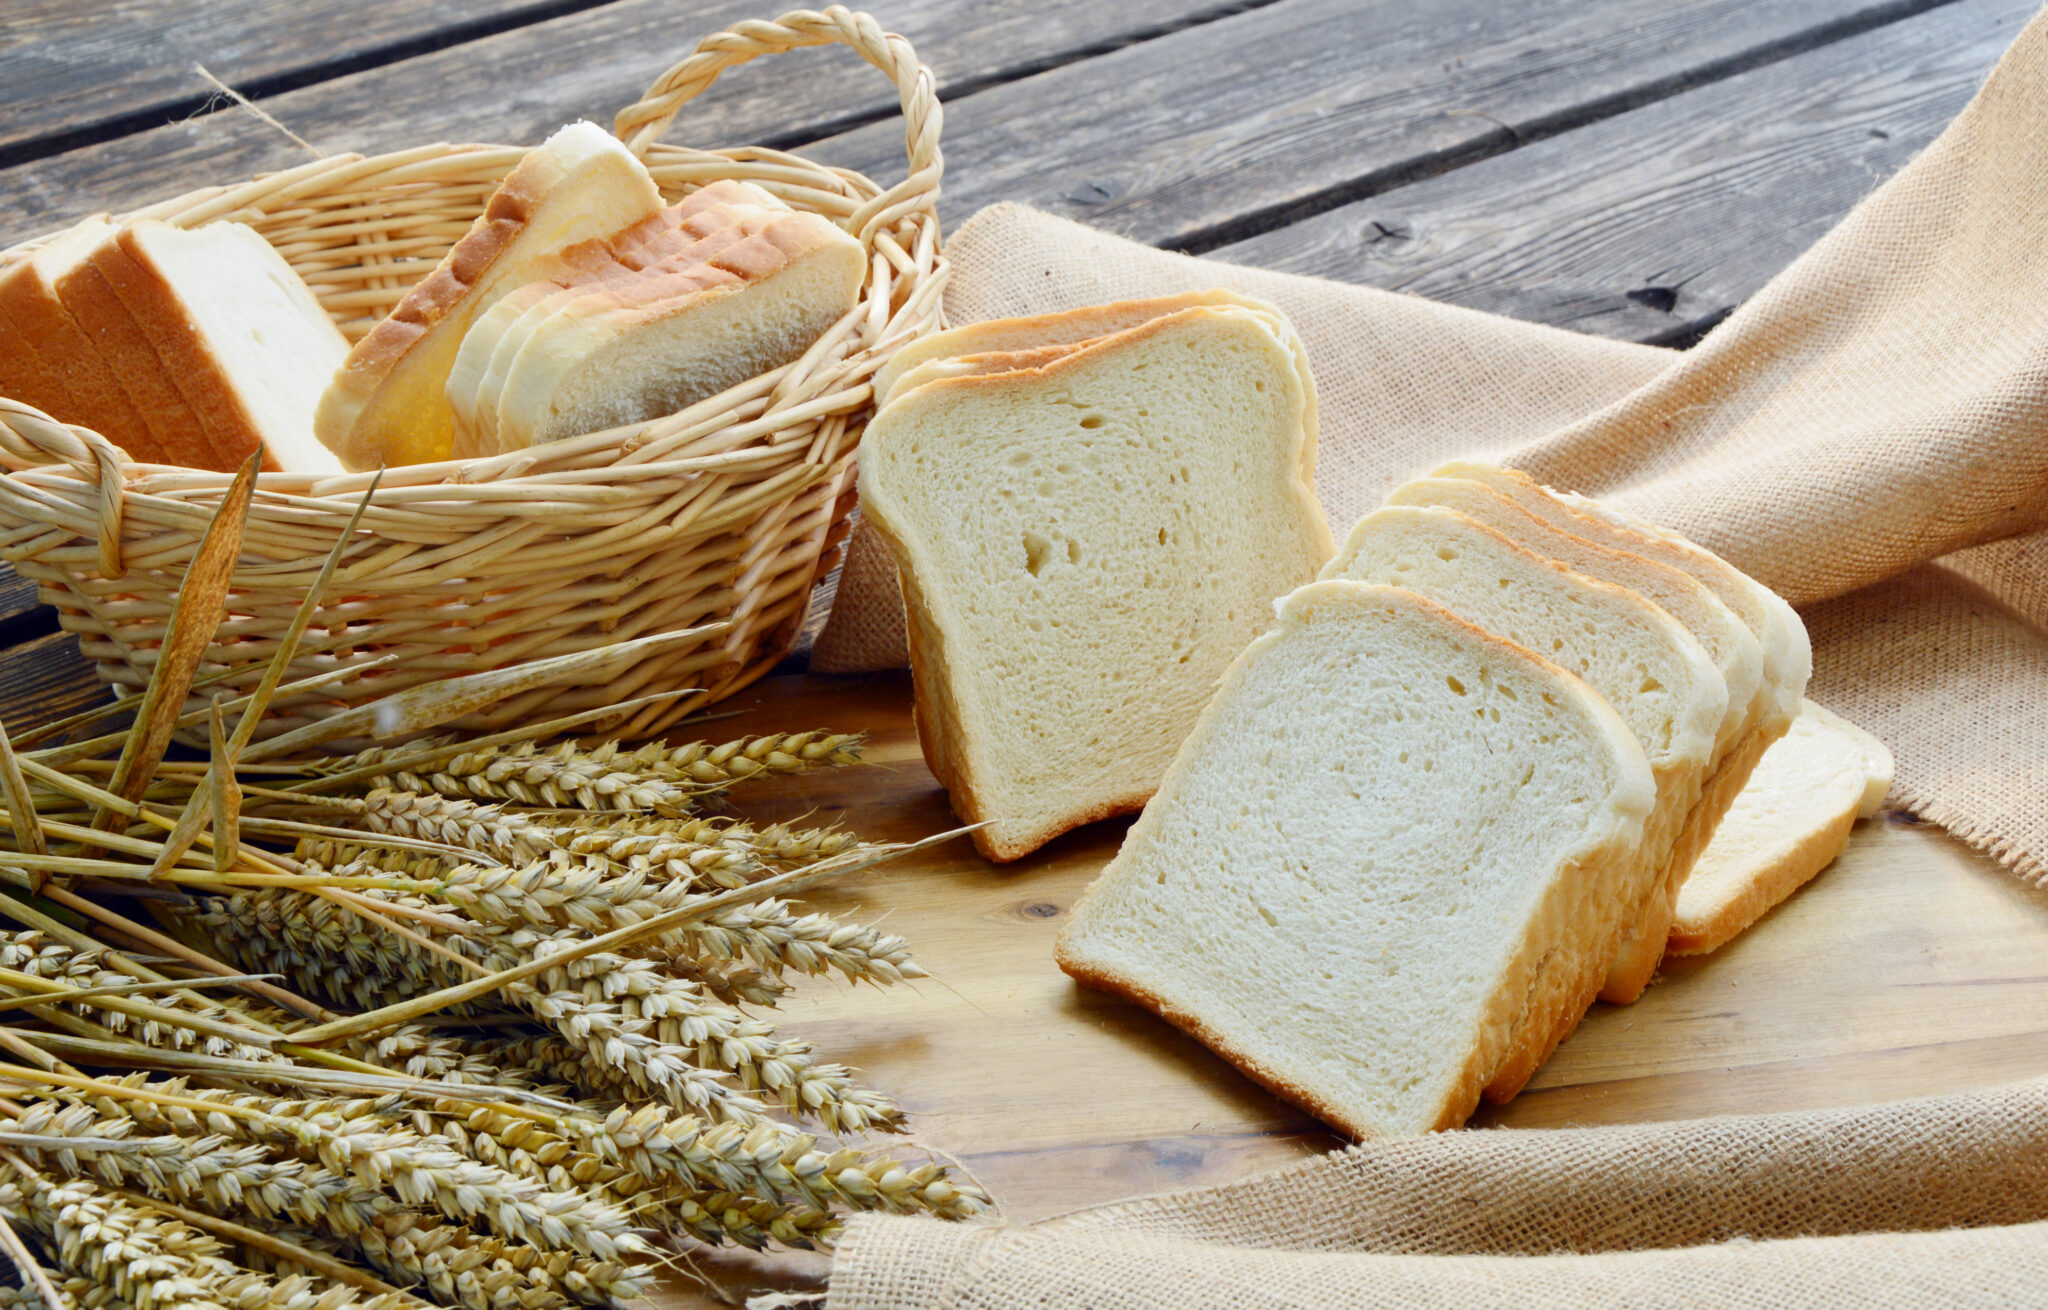 White,Bread,Or,Sliced,Bread,In,The,Basket,On,Wooden